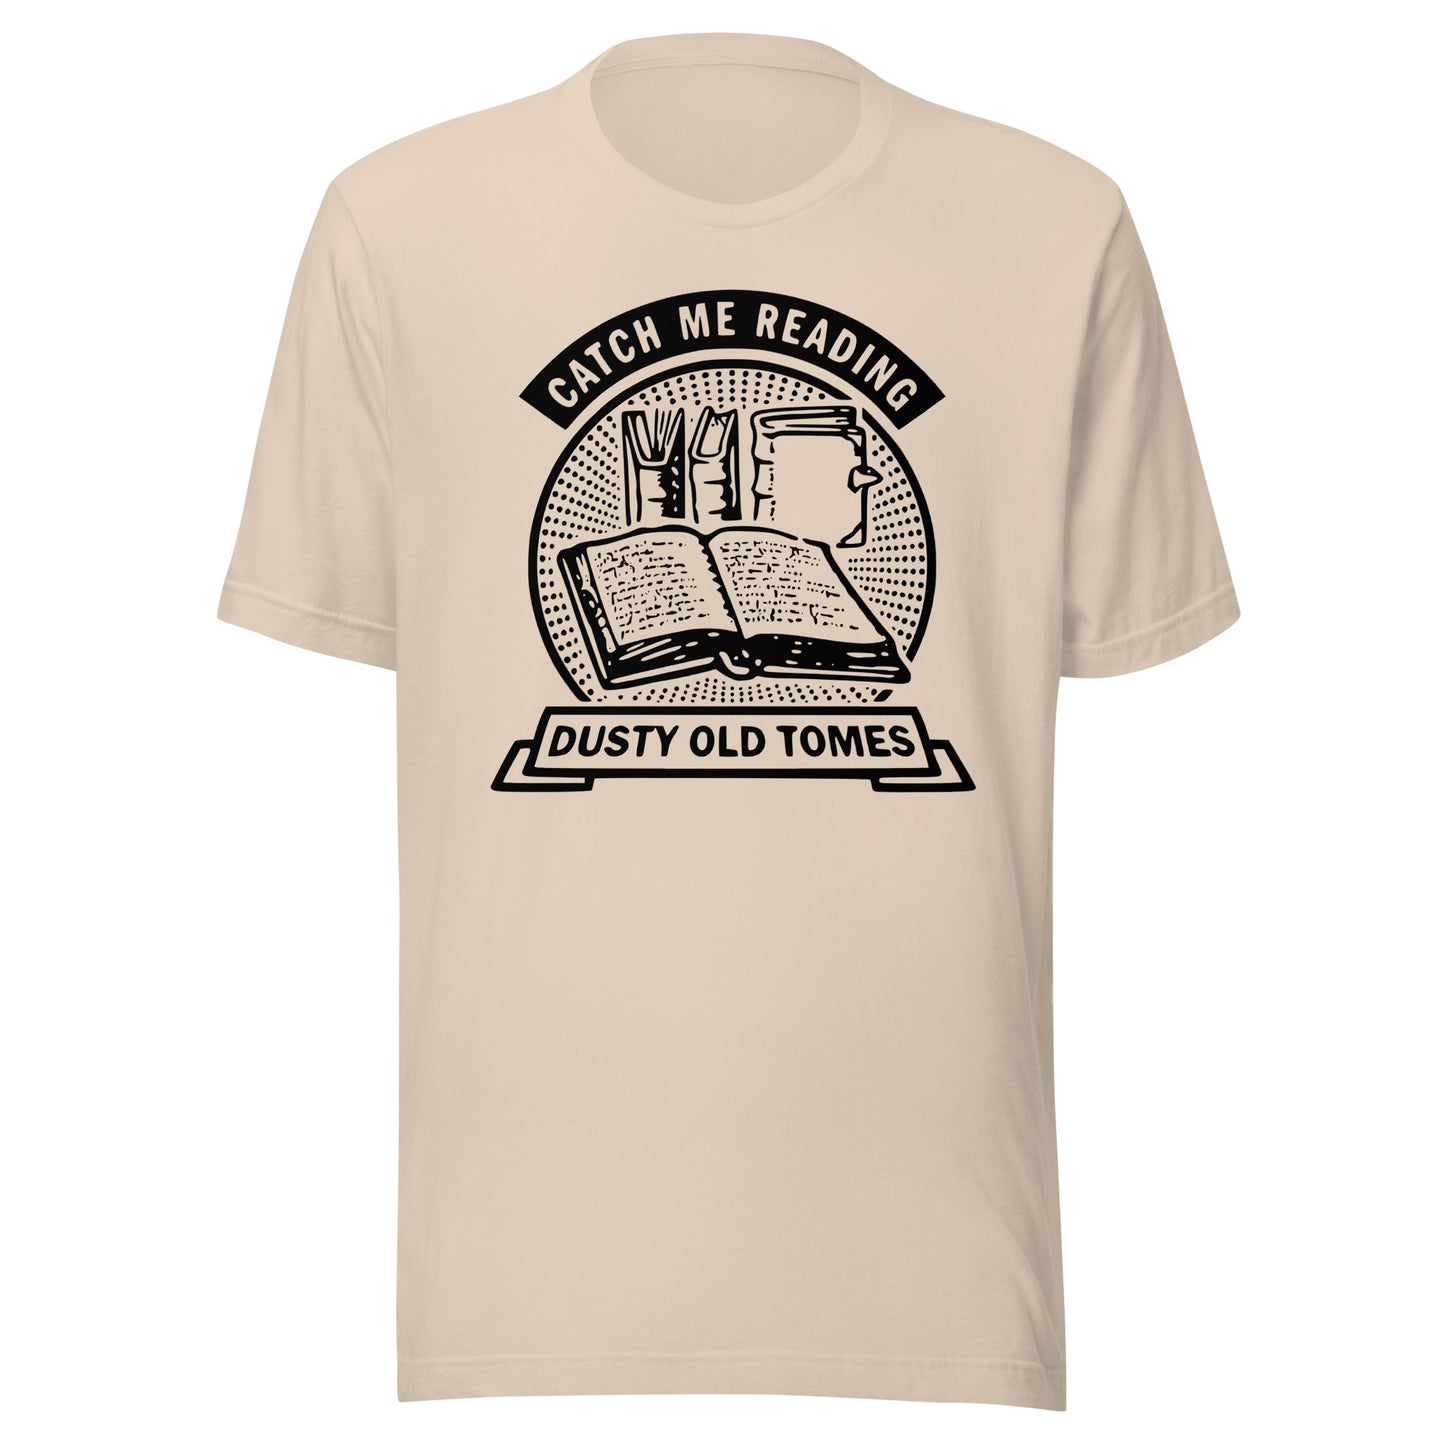 "Dusty Old Tomes" Unisex t-shirt